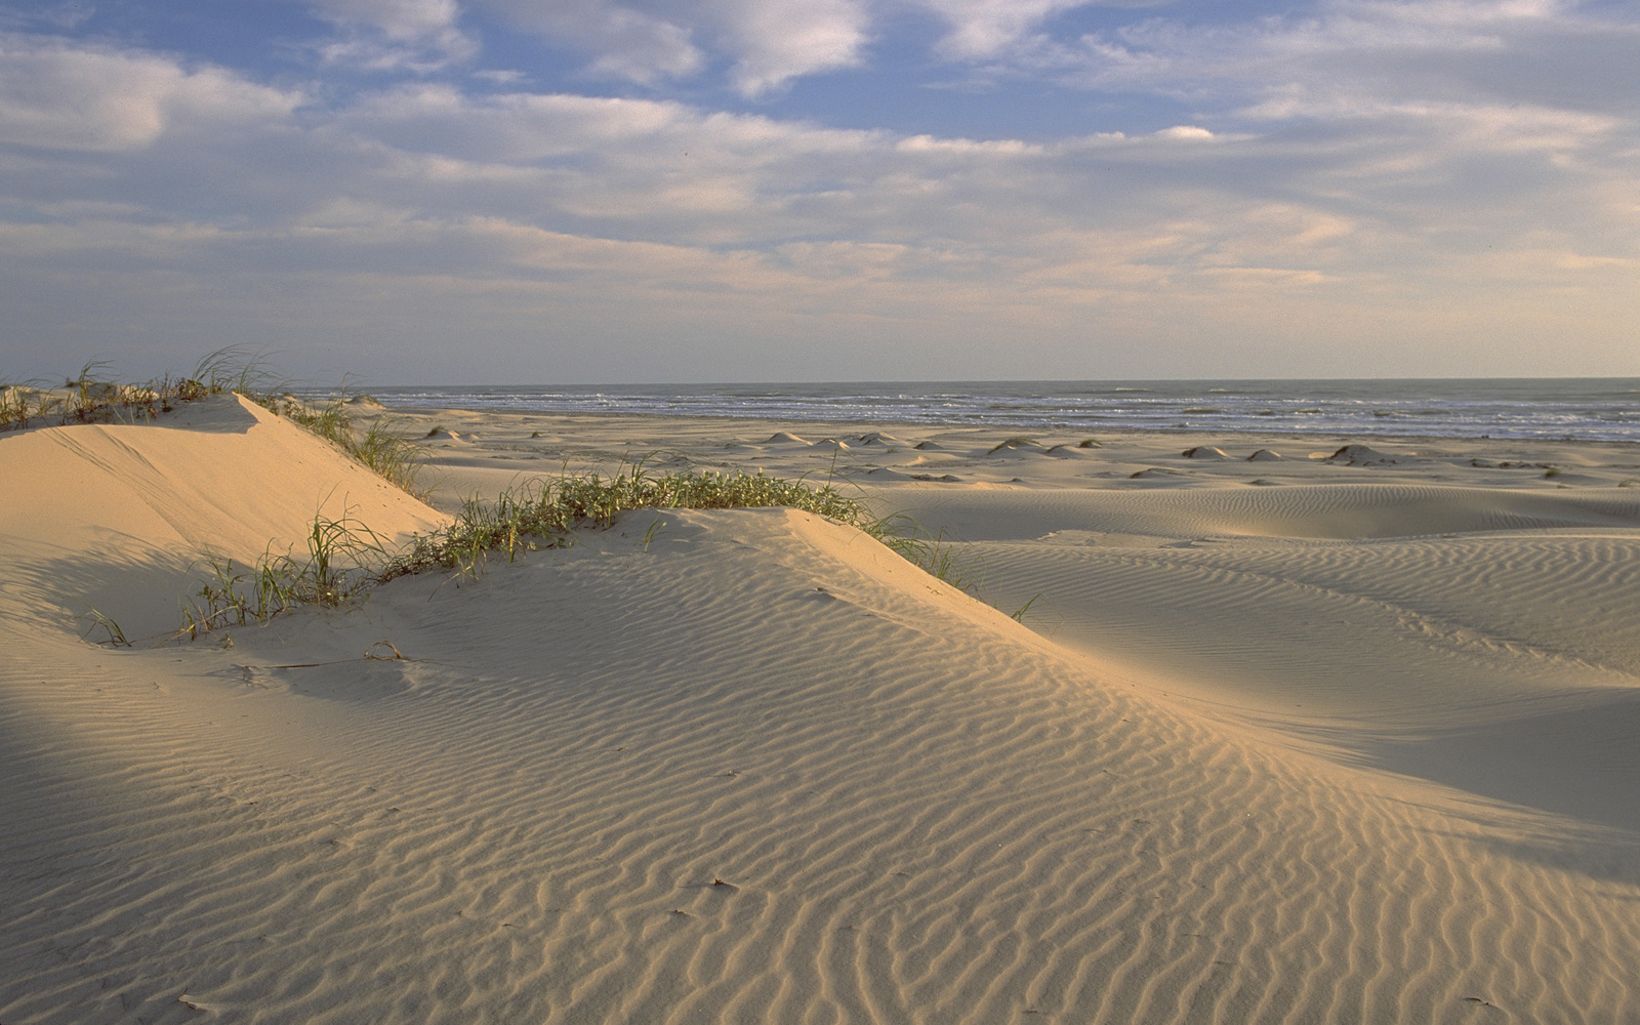 South Padre Island Coastal dunes on South Padre Island in Texas where TNC has purchased the 17,000-acre Powderhorn Ranch to protect and restore the coast. © Harold E. Malde